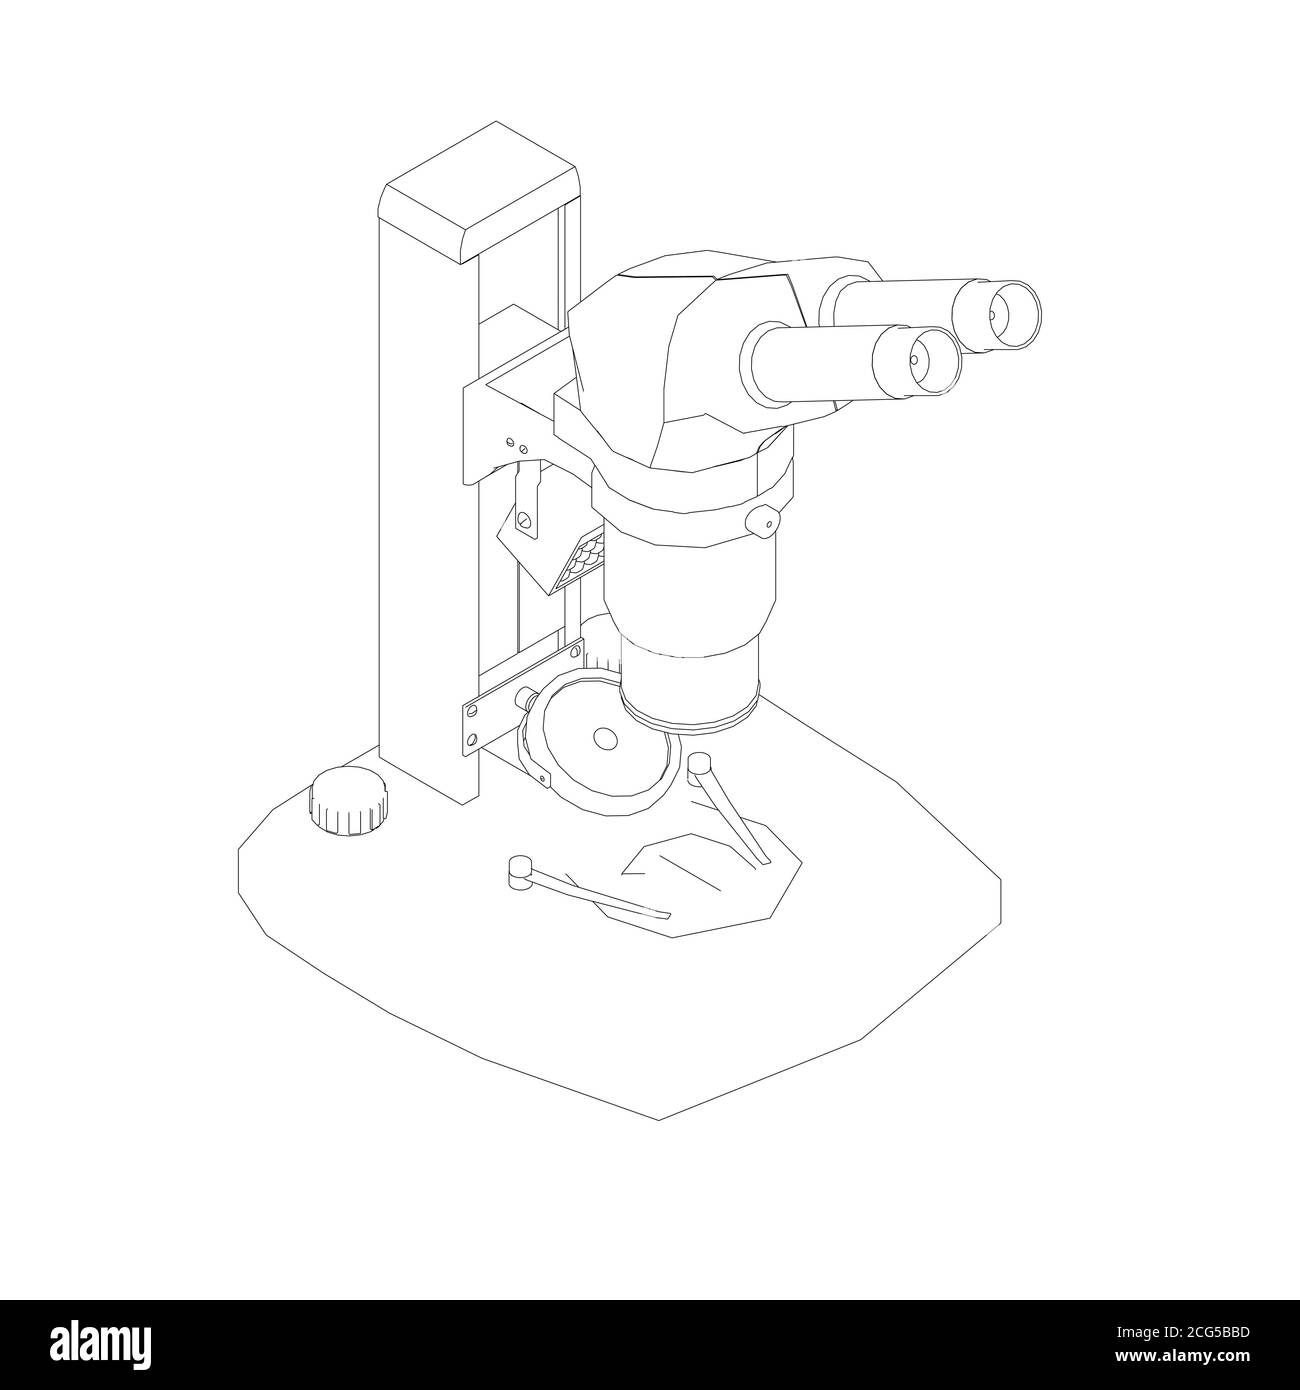 Microscope outline from black lines isolated on white background. Desktop microscope. Isometric view. Vector illustration Stock Vector